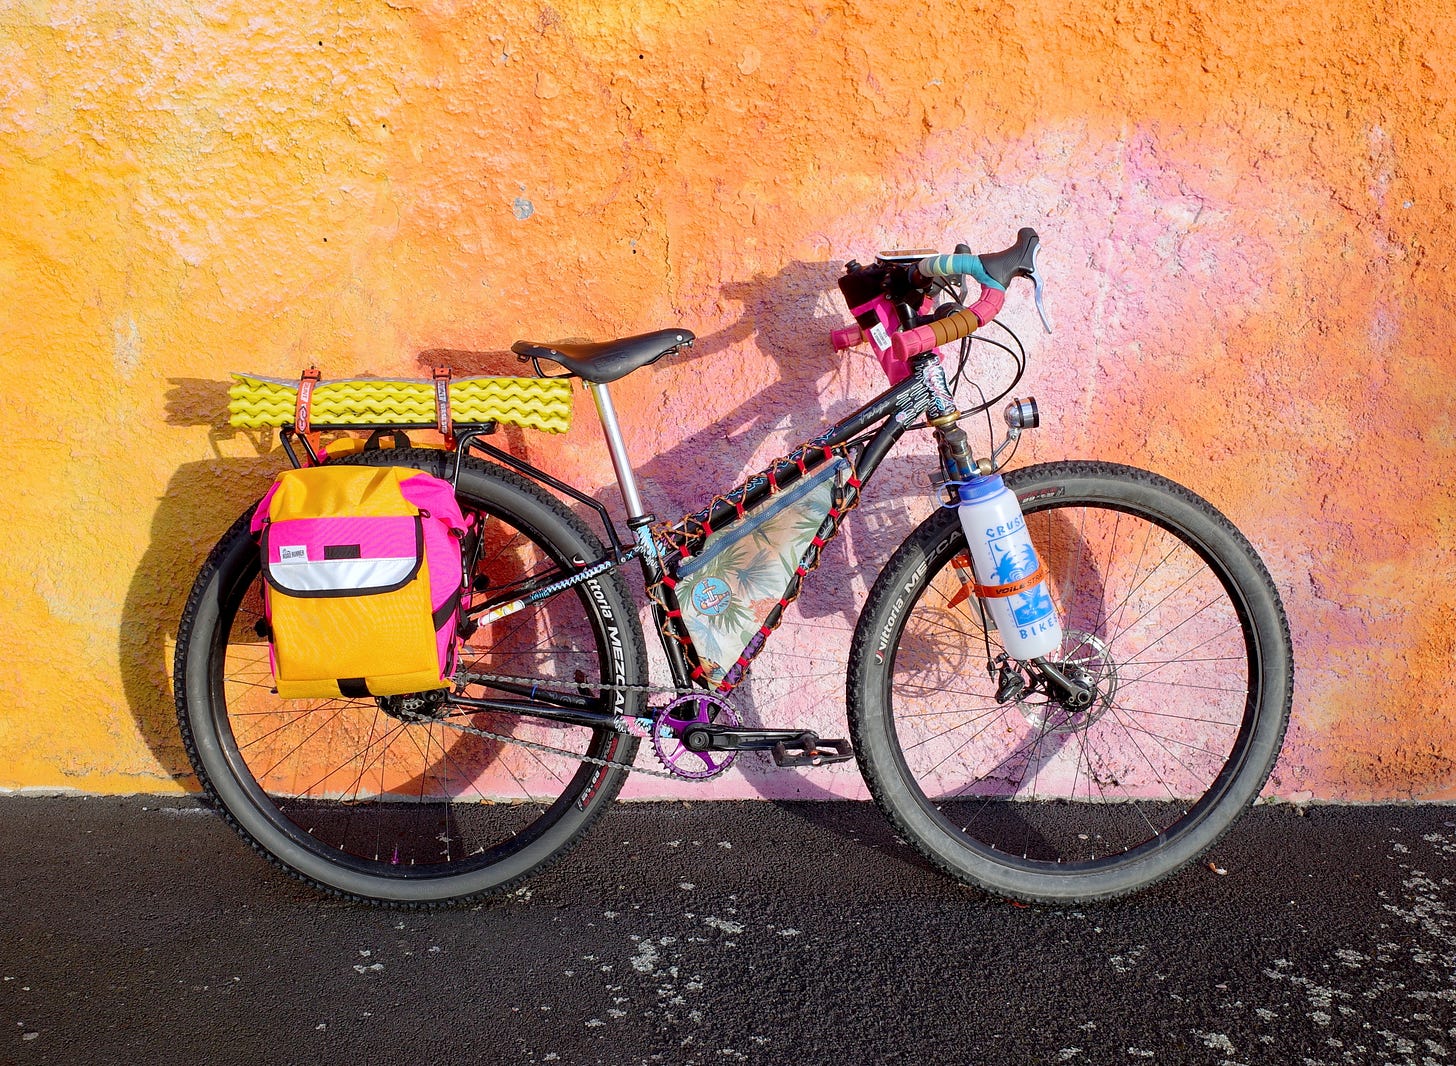 Robbie's bike is a mismash of parts, with bright colorful bags attached